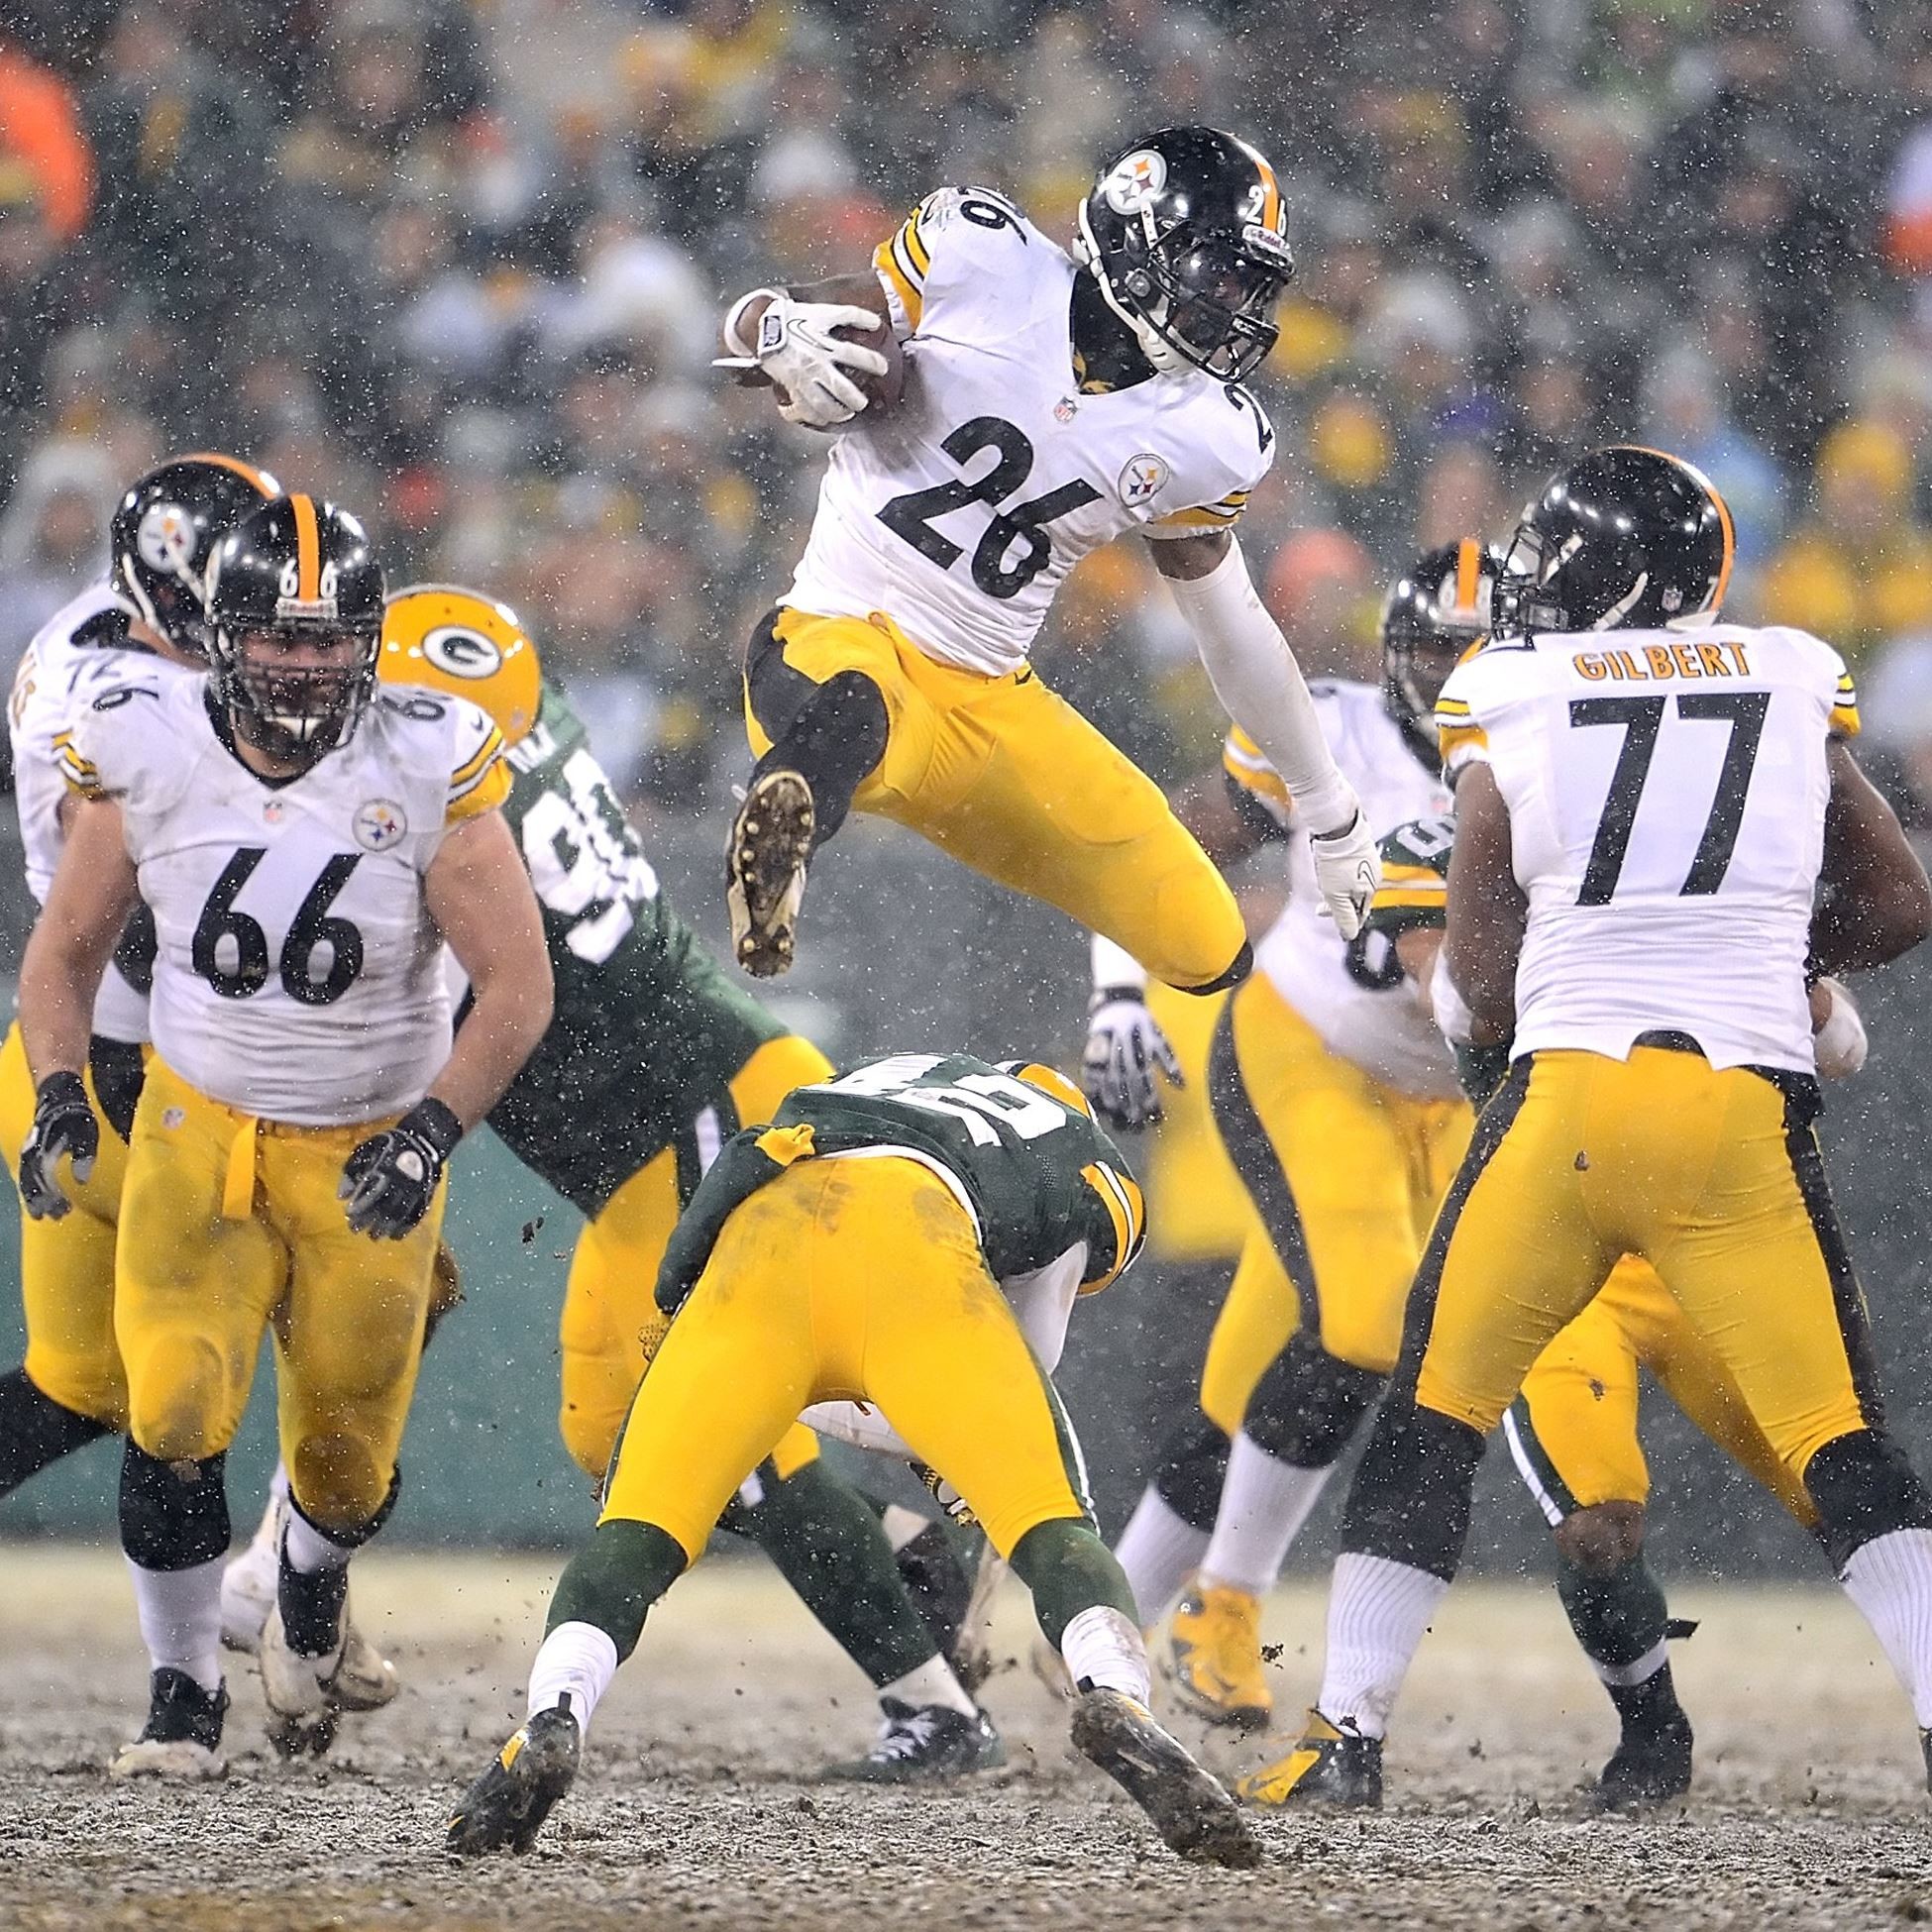 1950x1950 Steelers Le'Veon Bell leaps over Packers Morgan Burnett for first down  yardage in the third quarter at Lambeau Field.